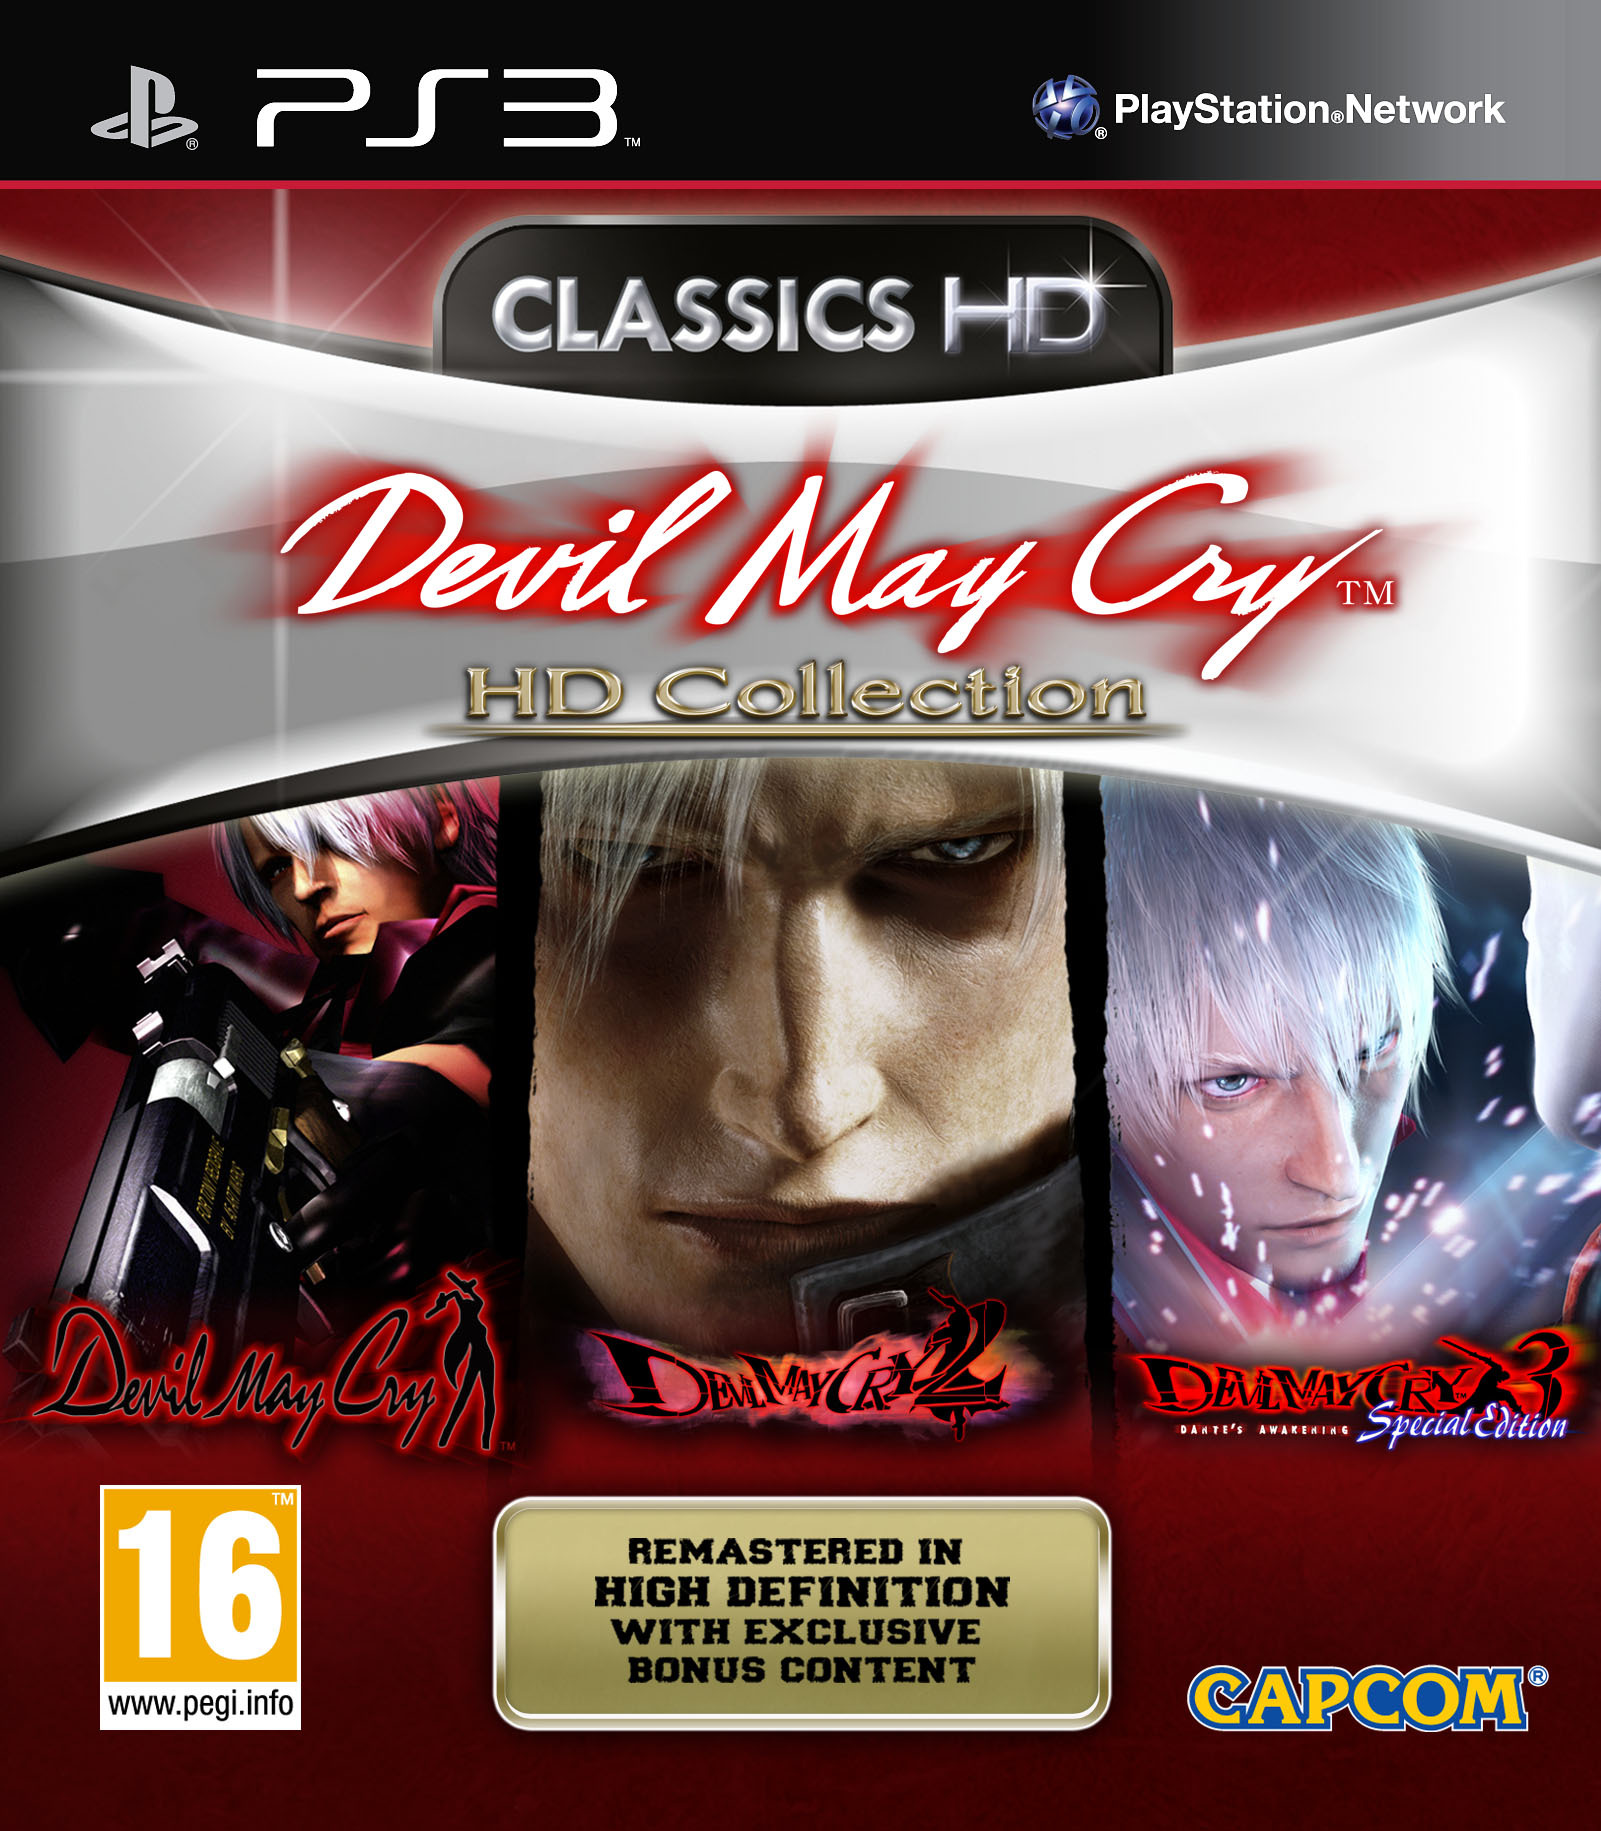 image_devil_may_cry_hd_collection-17446-2393_0002.jpg